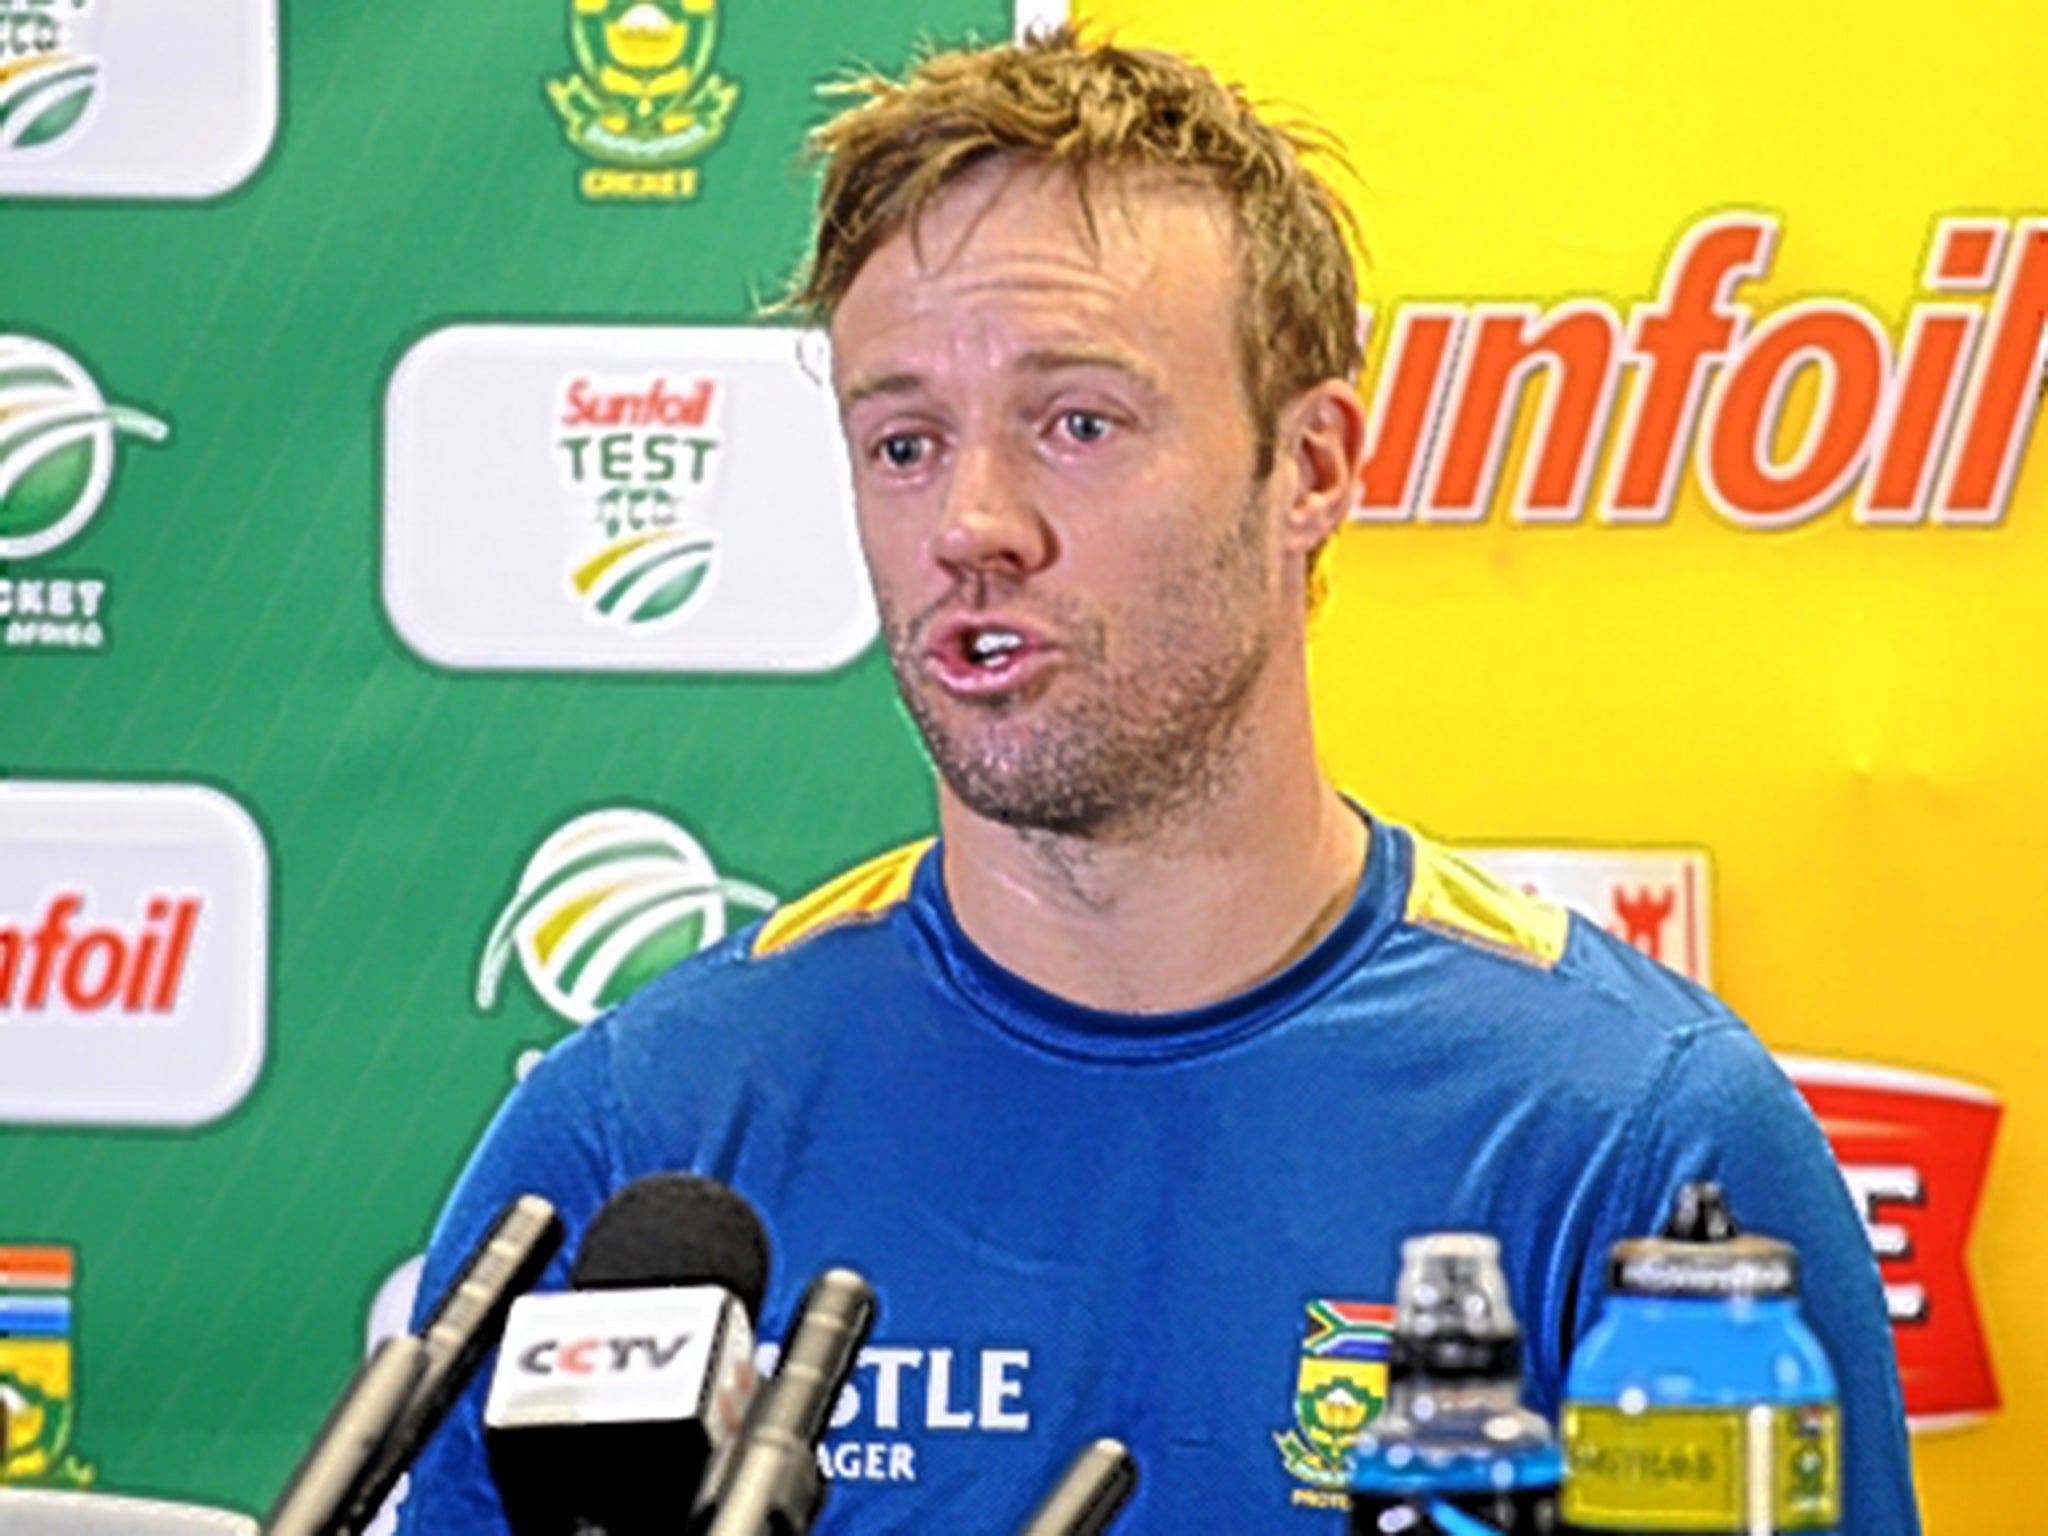 AB de Villiers said there was no such thing as a dead rubber in Test cricket